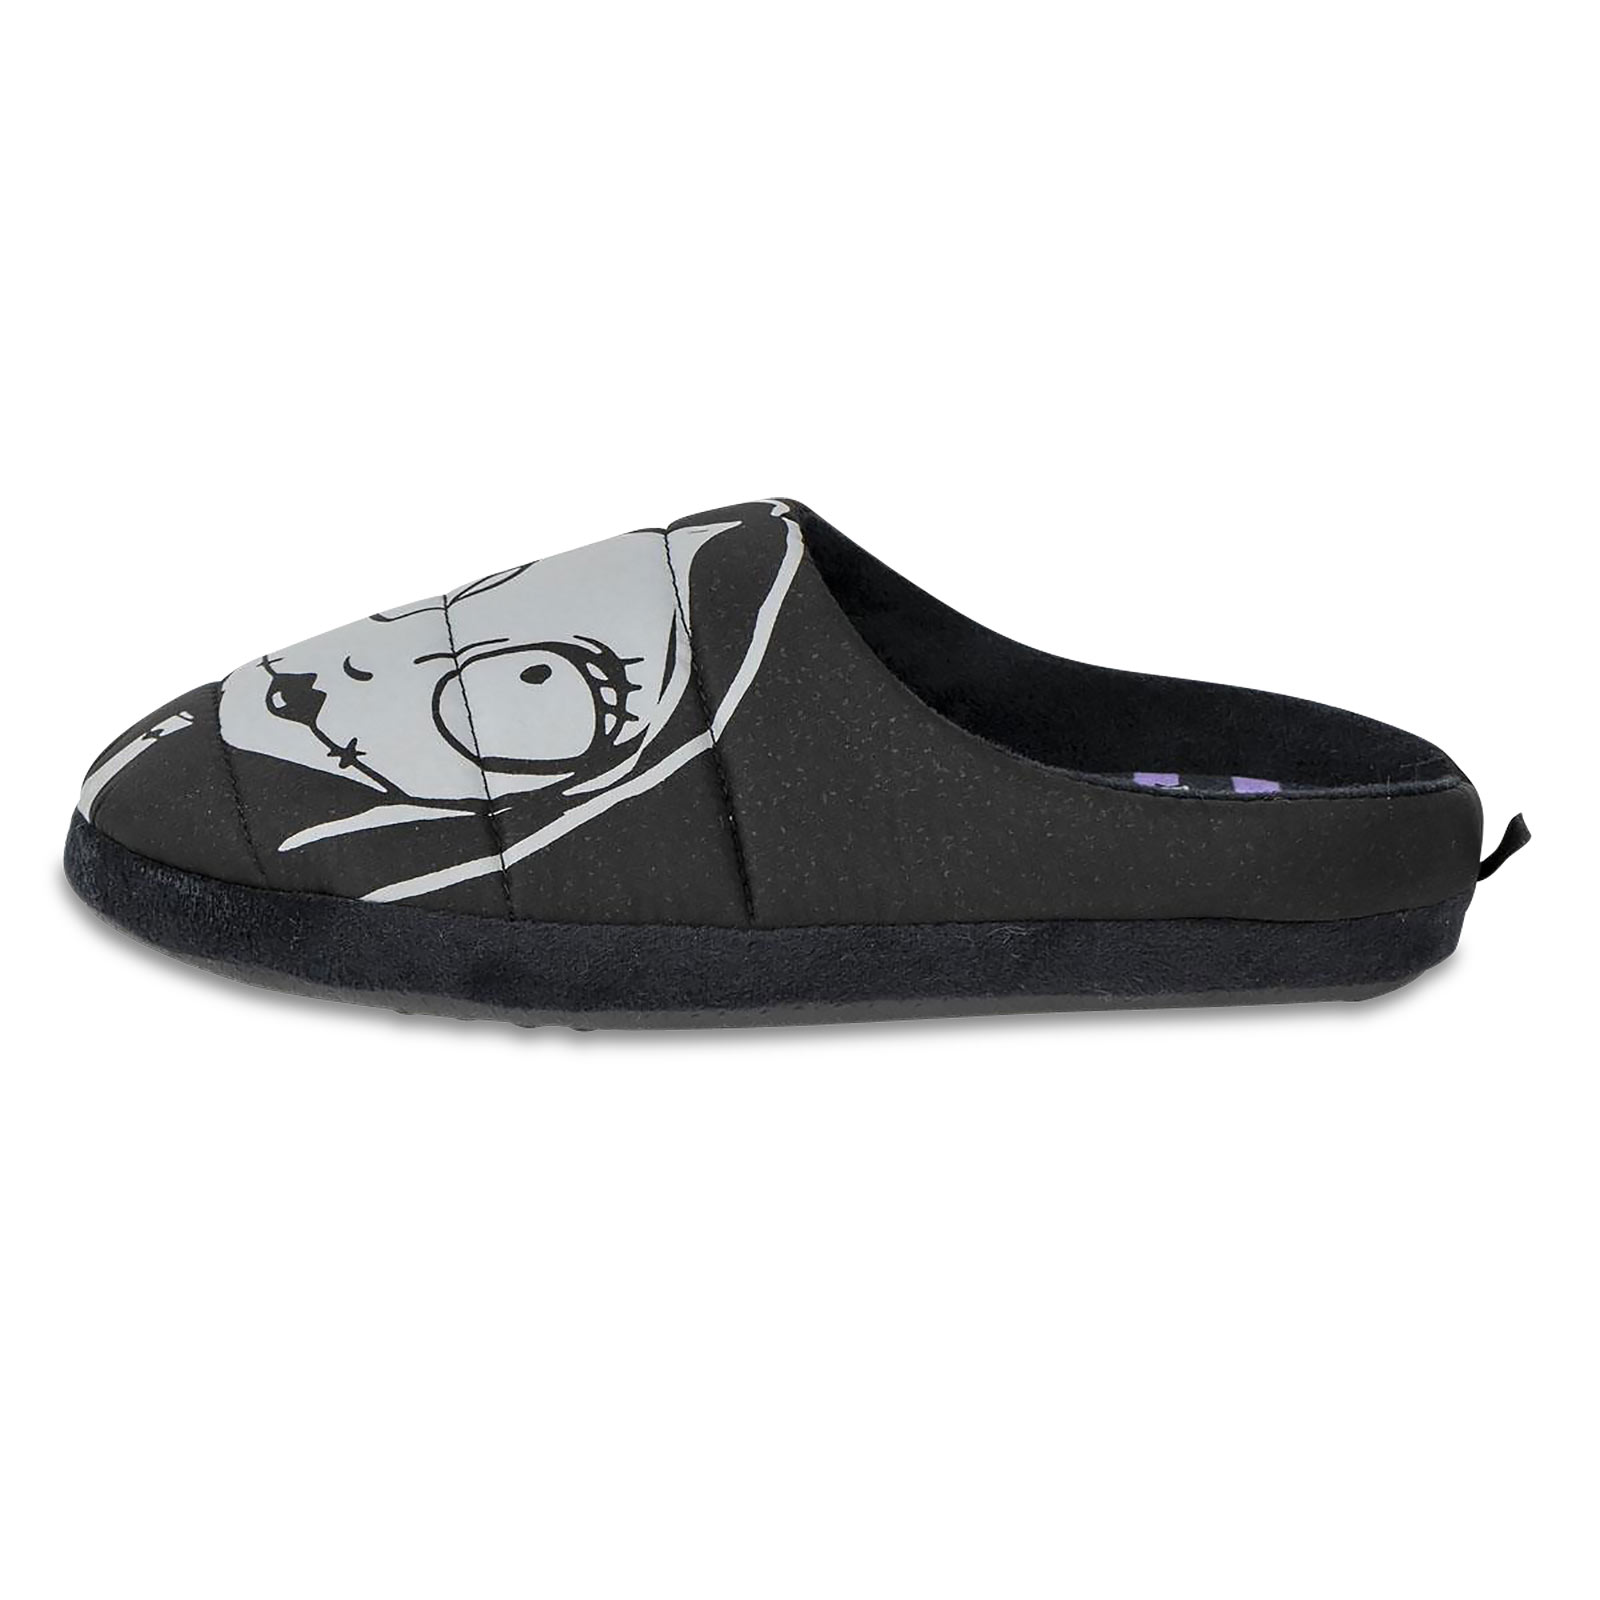 Nightmare Before Christmas - Chaussons Jack & Sally